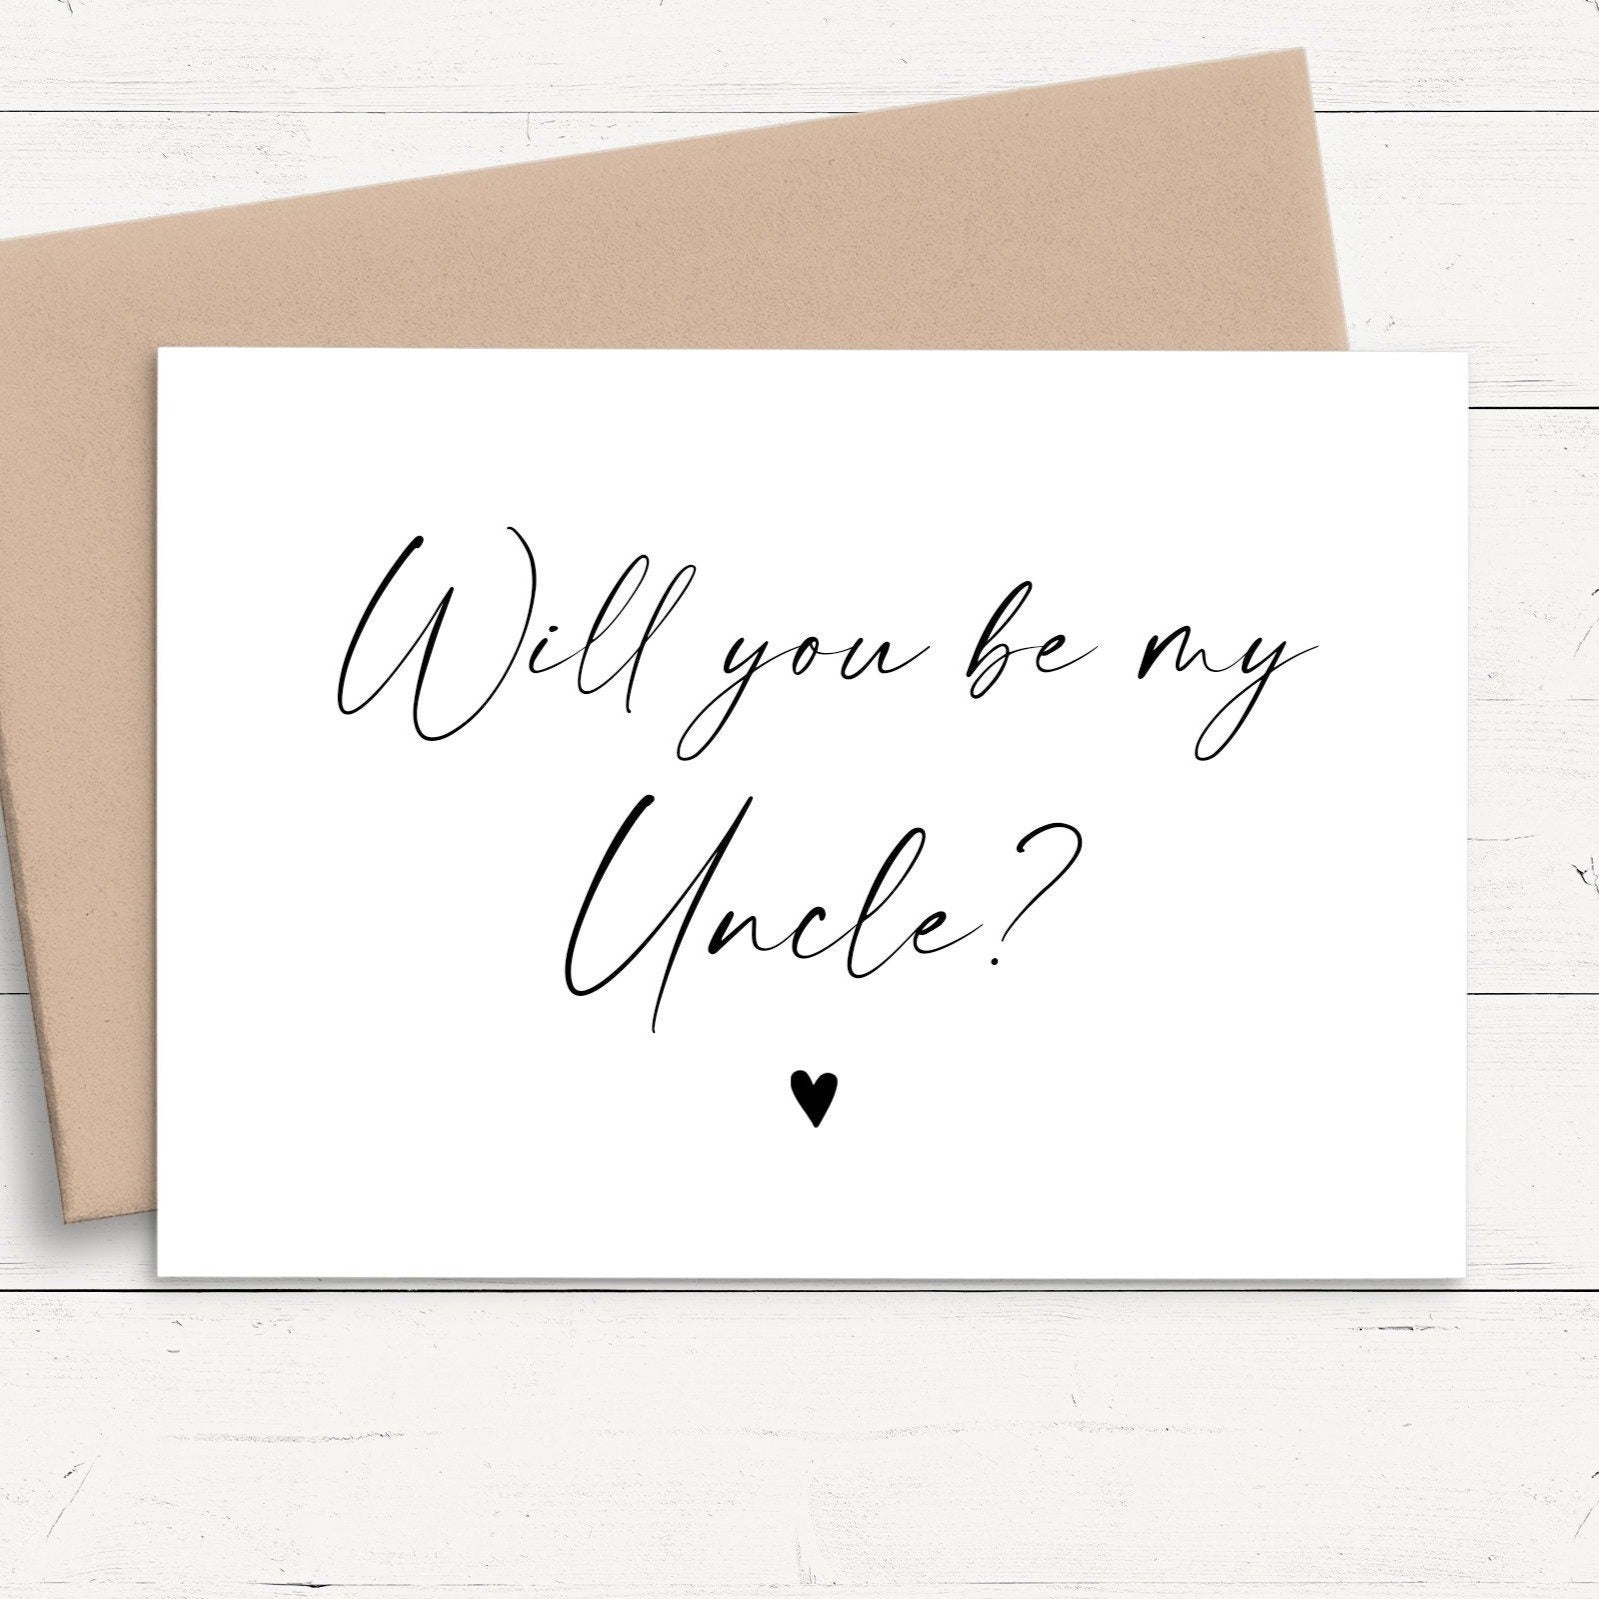 will you be my uncle pregnancy announcement card brother personalised matte white cardstock kraft brown envelope